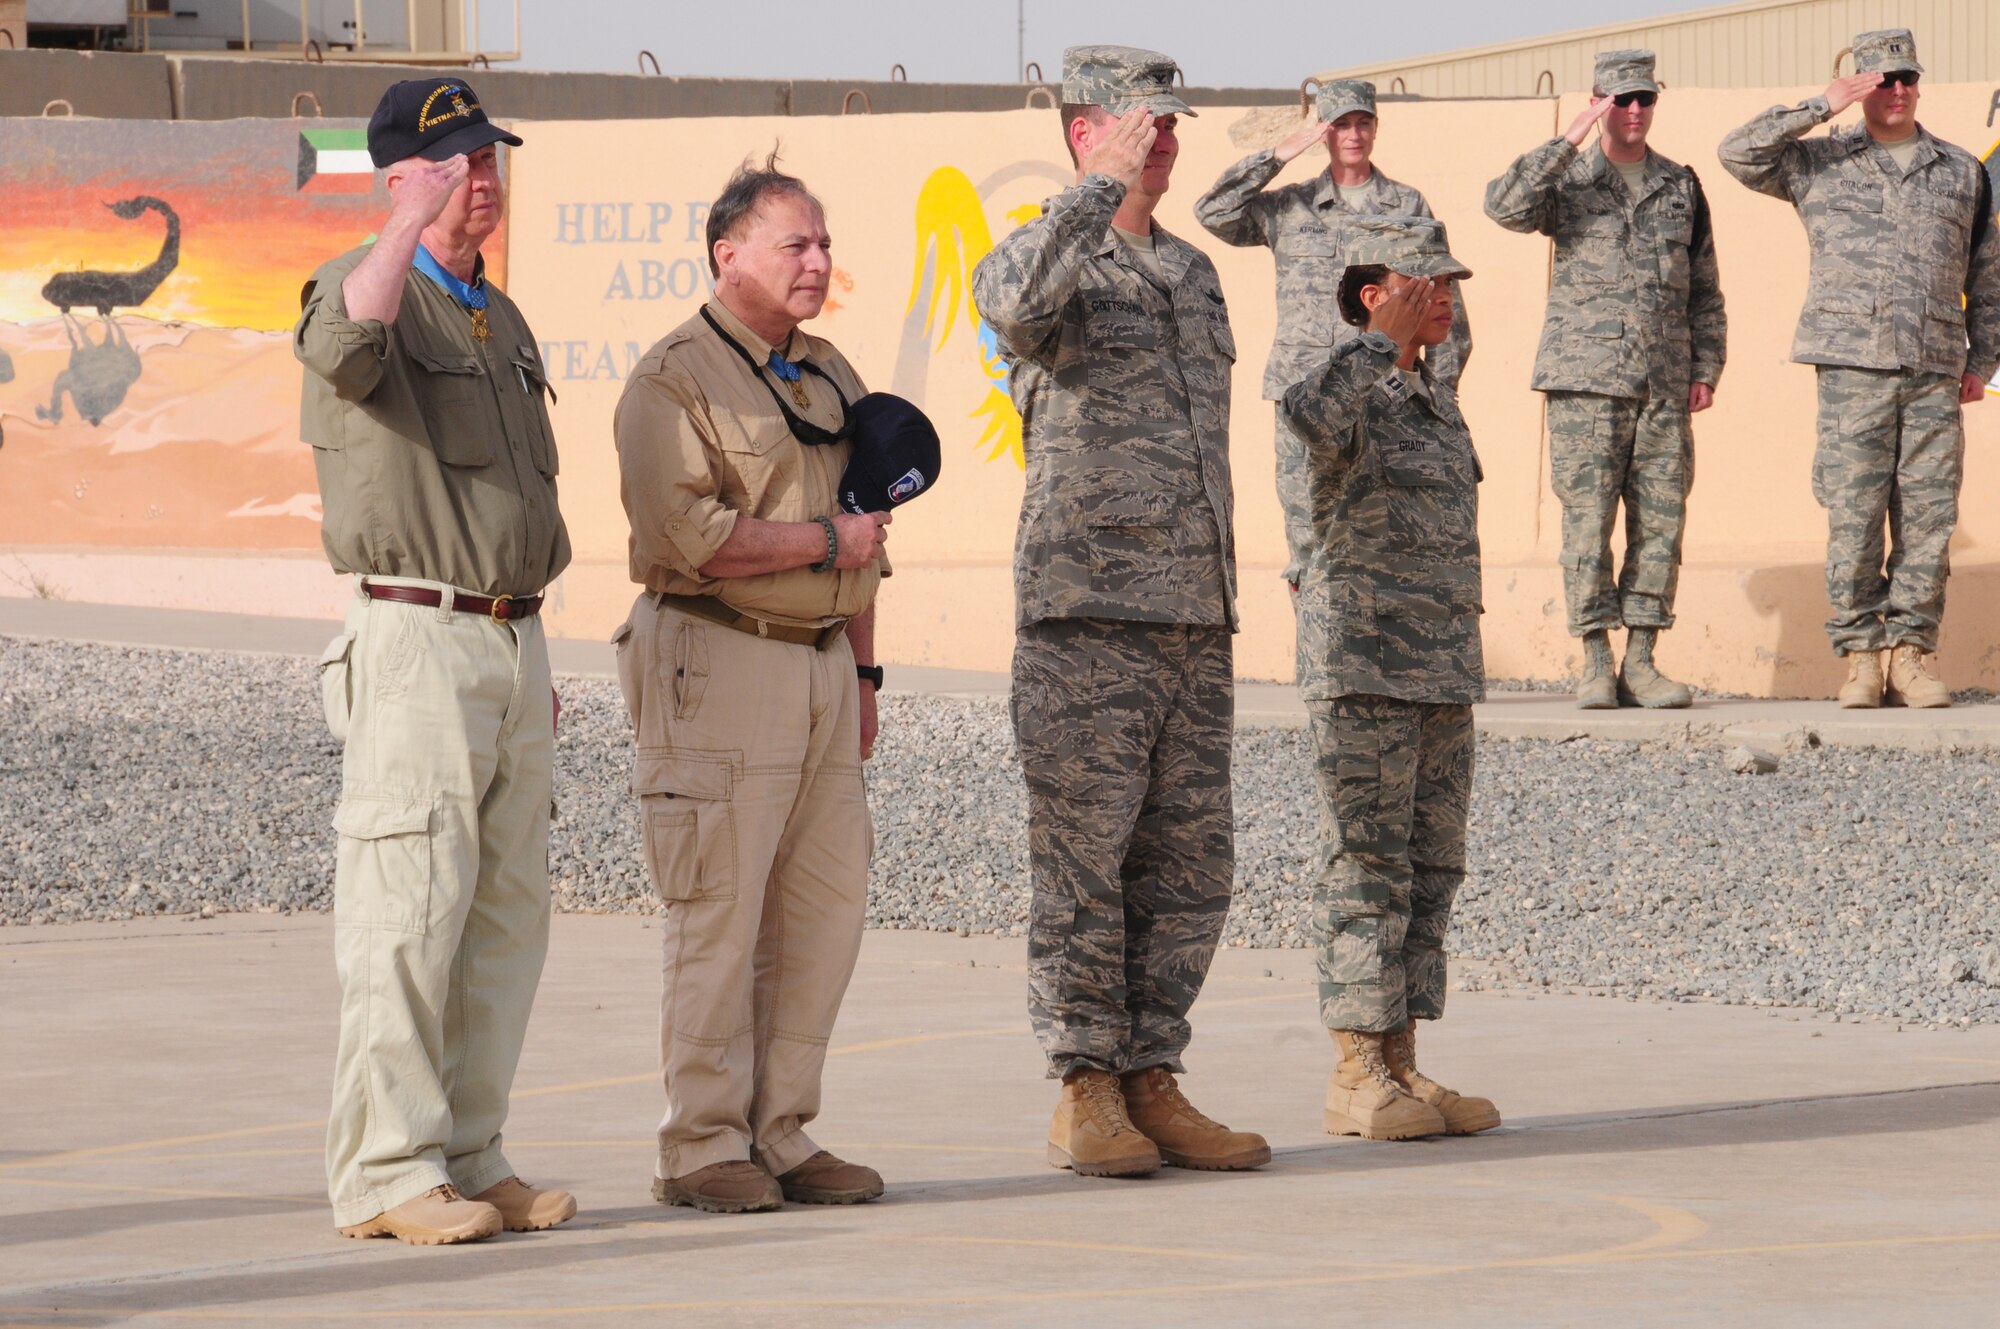 From left, Don Jenkins, retired U.S. Army Lt. Col. Alfred Rascon, U.S. Air Force Col. Gary Gottschall and Capt. Sheila Grady pay respect to the U.S. flag during a retreat ceremony April 10, 2010 at an air base in Southwest Asia. Mr. Jenkins and Colonel Rascon, both Vietnam era Medal of Honor recipients, shared their stories with Airmen as part of a tour visiting troops at various bases throughout the U.S. Central Command area of responsibility. Colonel Gottschall is the 386th Air Expeditionary Wing vice commander and Captain Grady is the 386th AEW protocol chief. (U.S. Air Force photo by Staff Sgt. Lakisha A. Croley/Released)